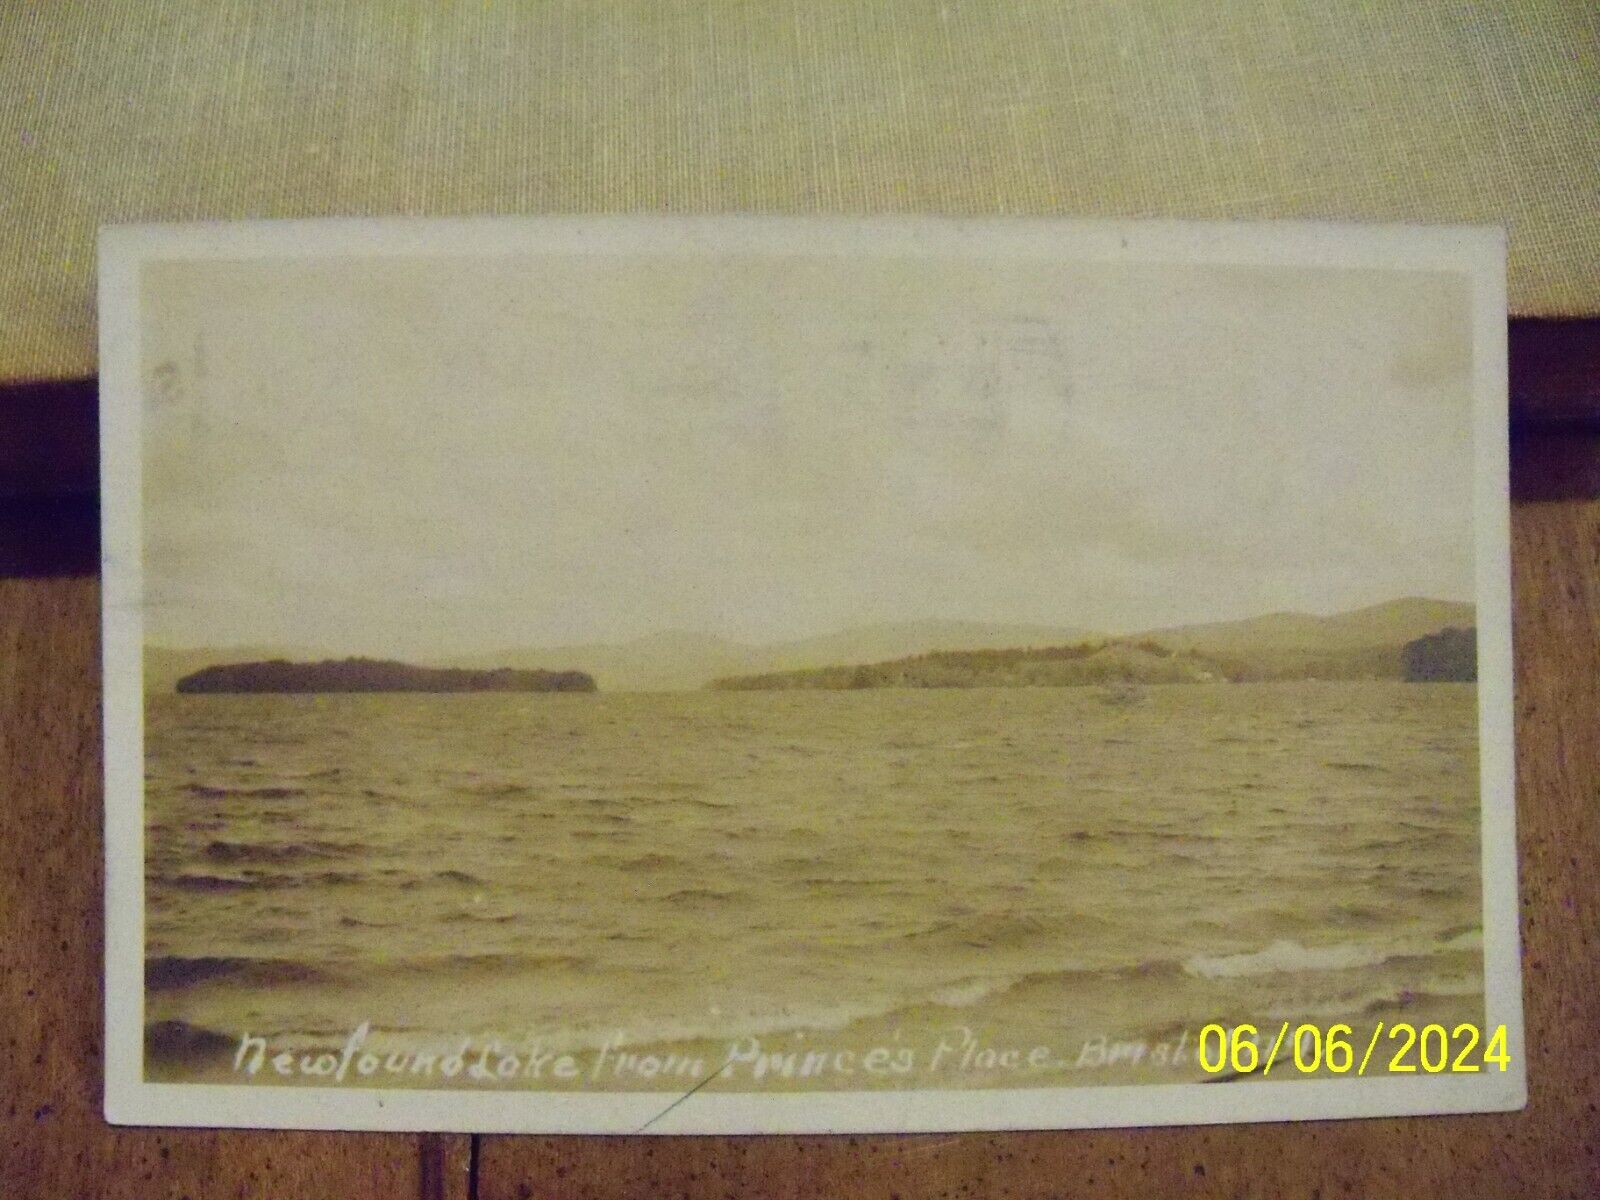 1928 Newfound Lake from Prince's Place Bristol NH New Hampshire RPPC photo card